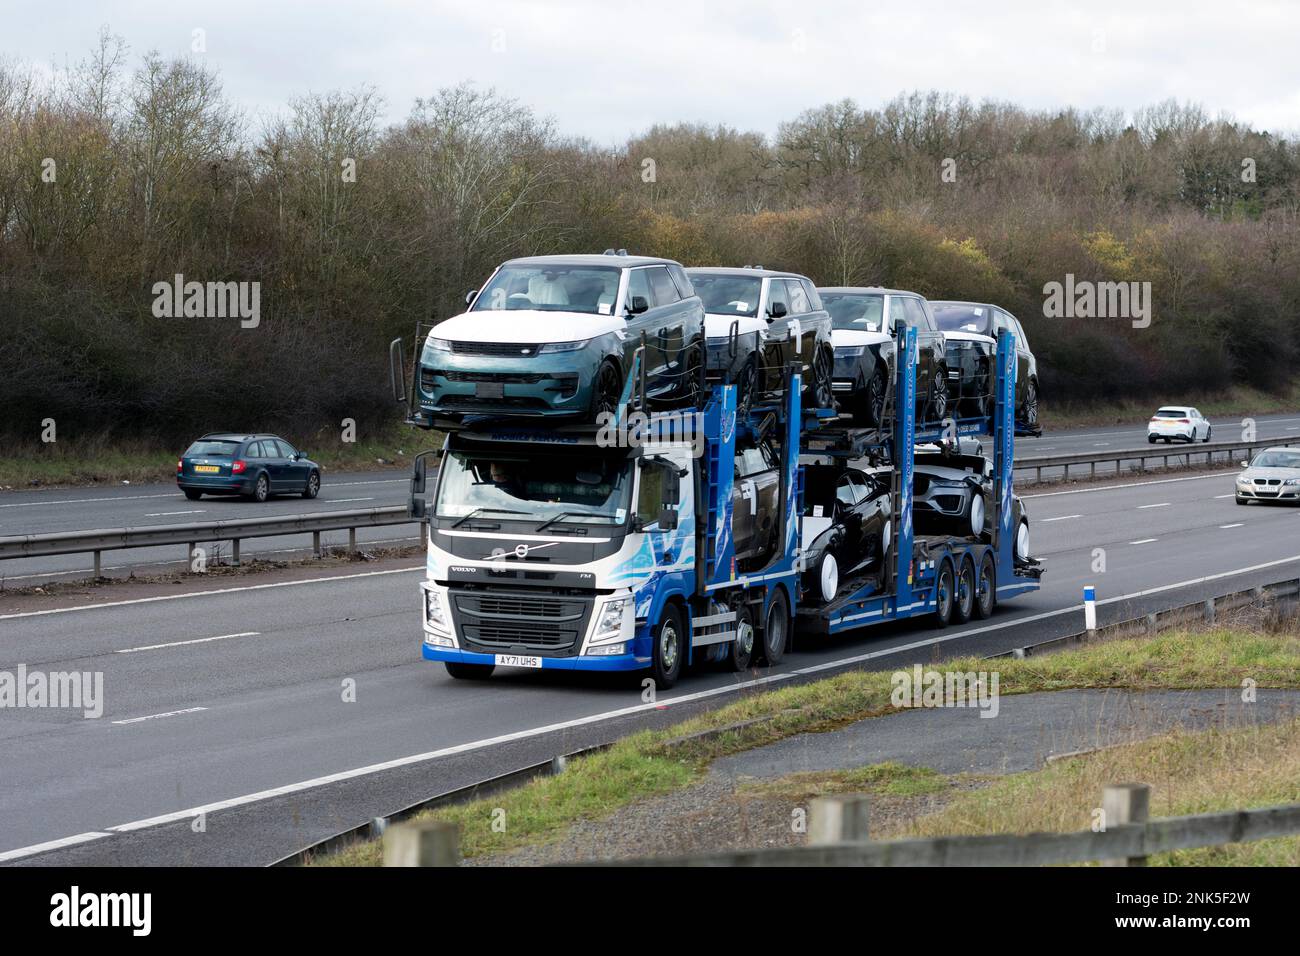 Mobile Services transporter lorry carrying new Land Rover cars, M40 motorway, Warwickshire, UK Stock Photo